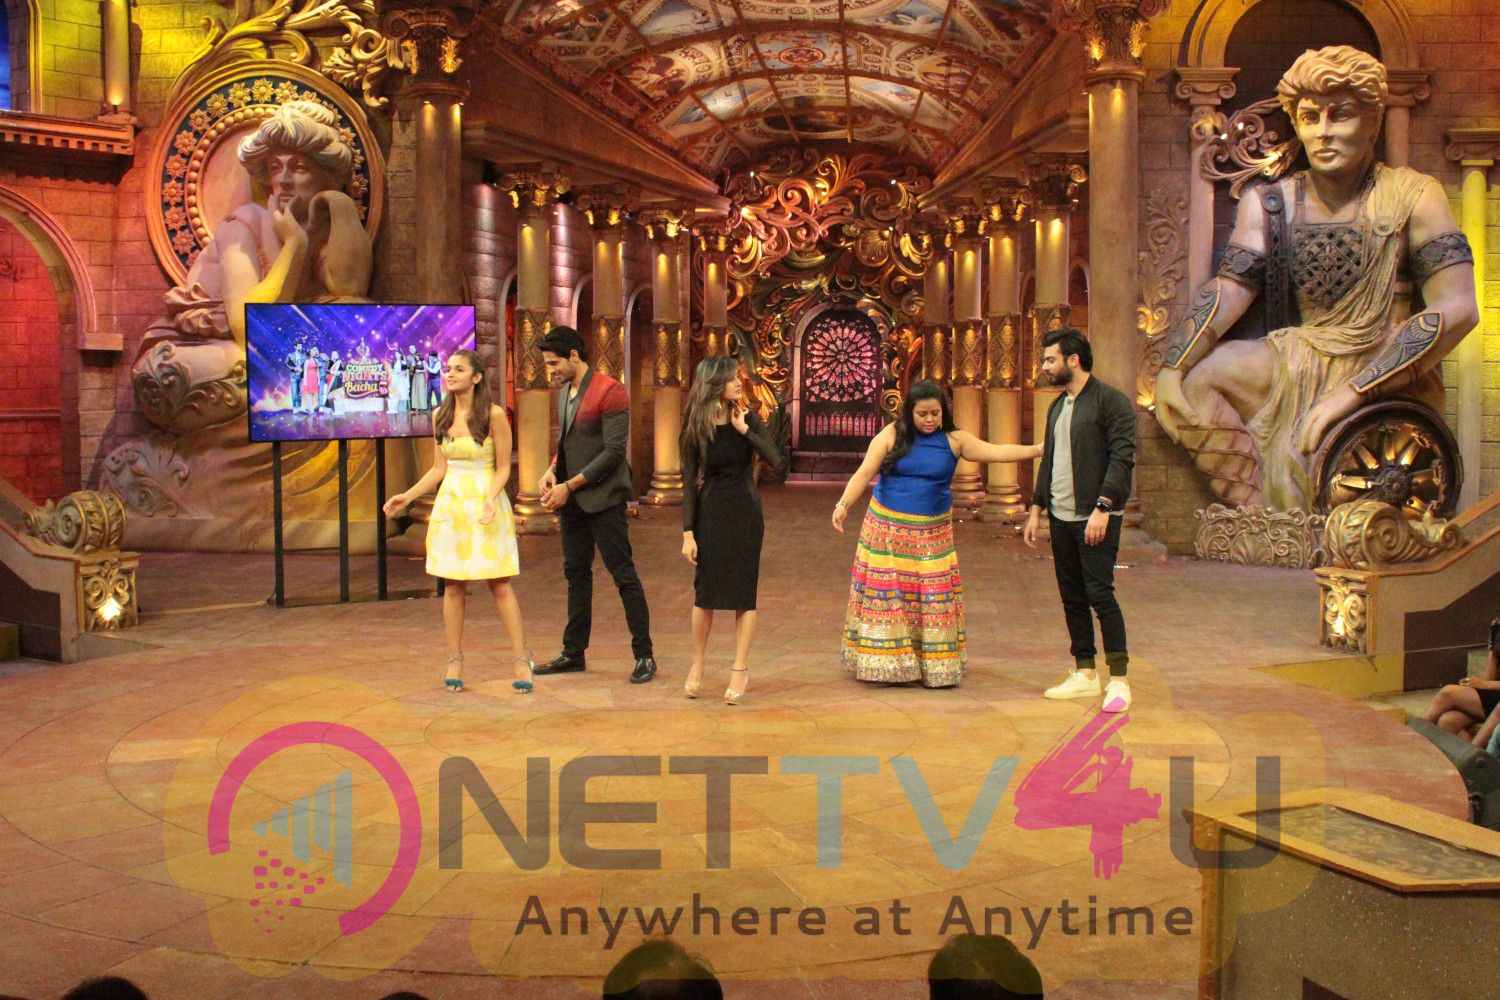 Kapoor & Sons Team At Comedy Nights Bachao Show Latest Skills Hindi Gallery